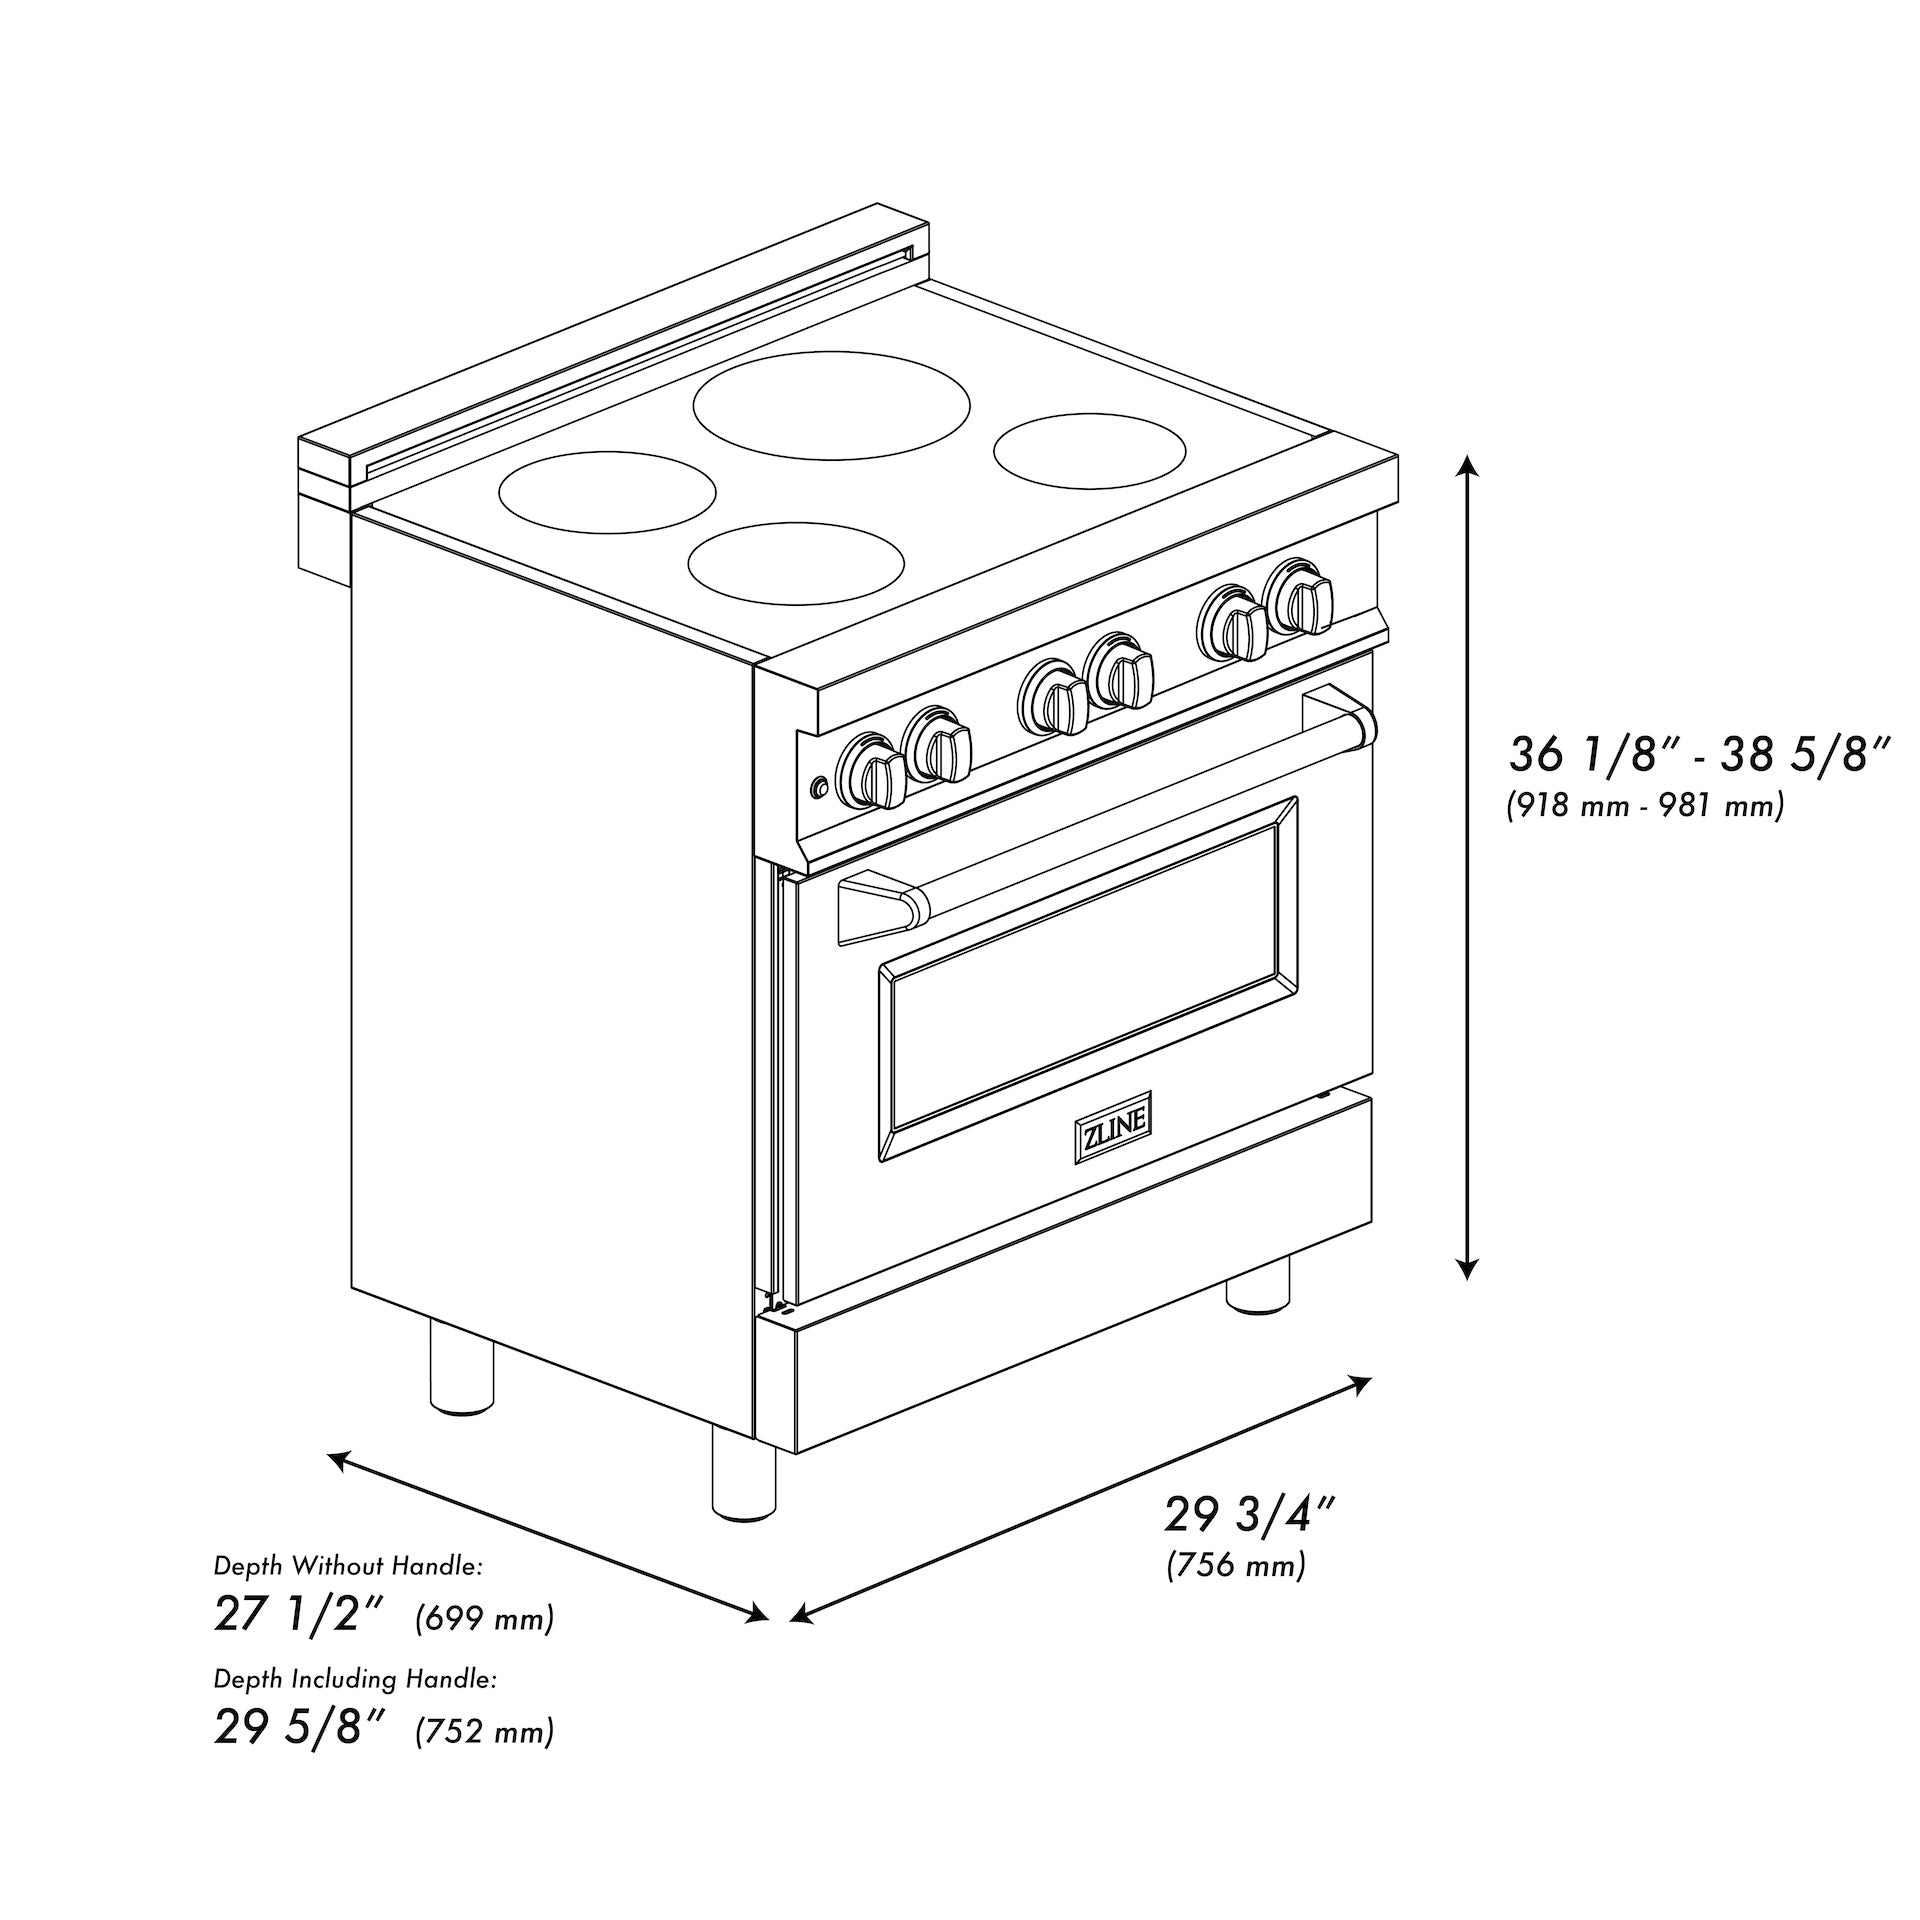 ZLINE 30 in. 4.0 cu. ft. Induction Range with a 4 Induction Element Stove and Electric Oven in Stainless Steel with Black Matte Door (RAIND-BLM-30) dimensional diagram with measurements.